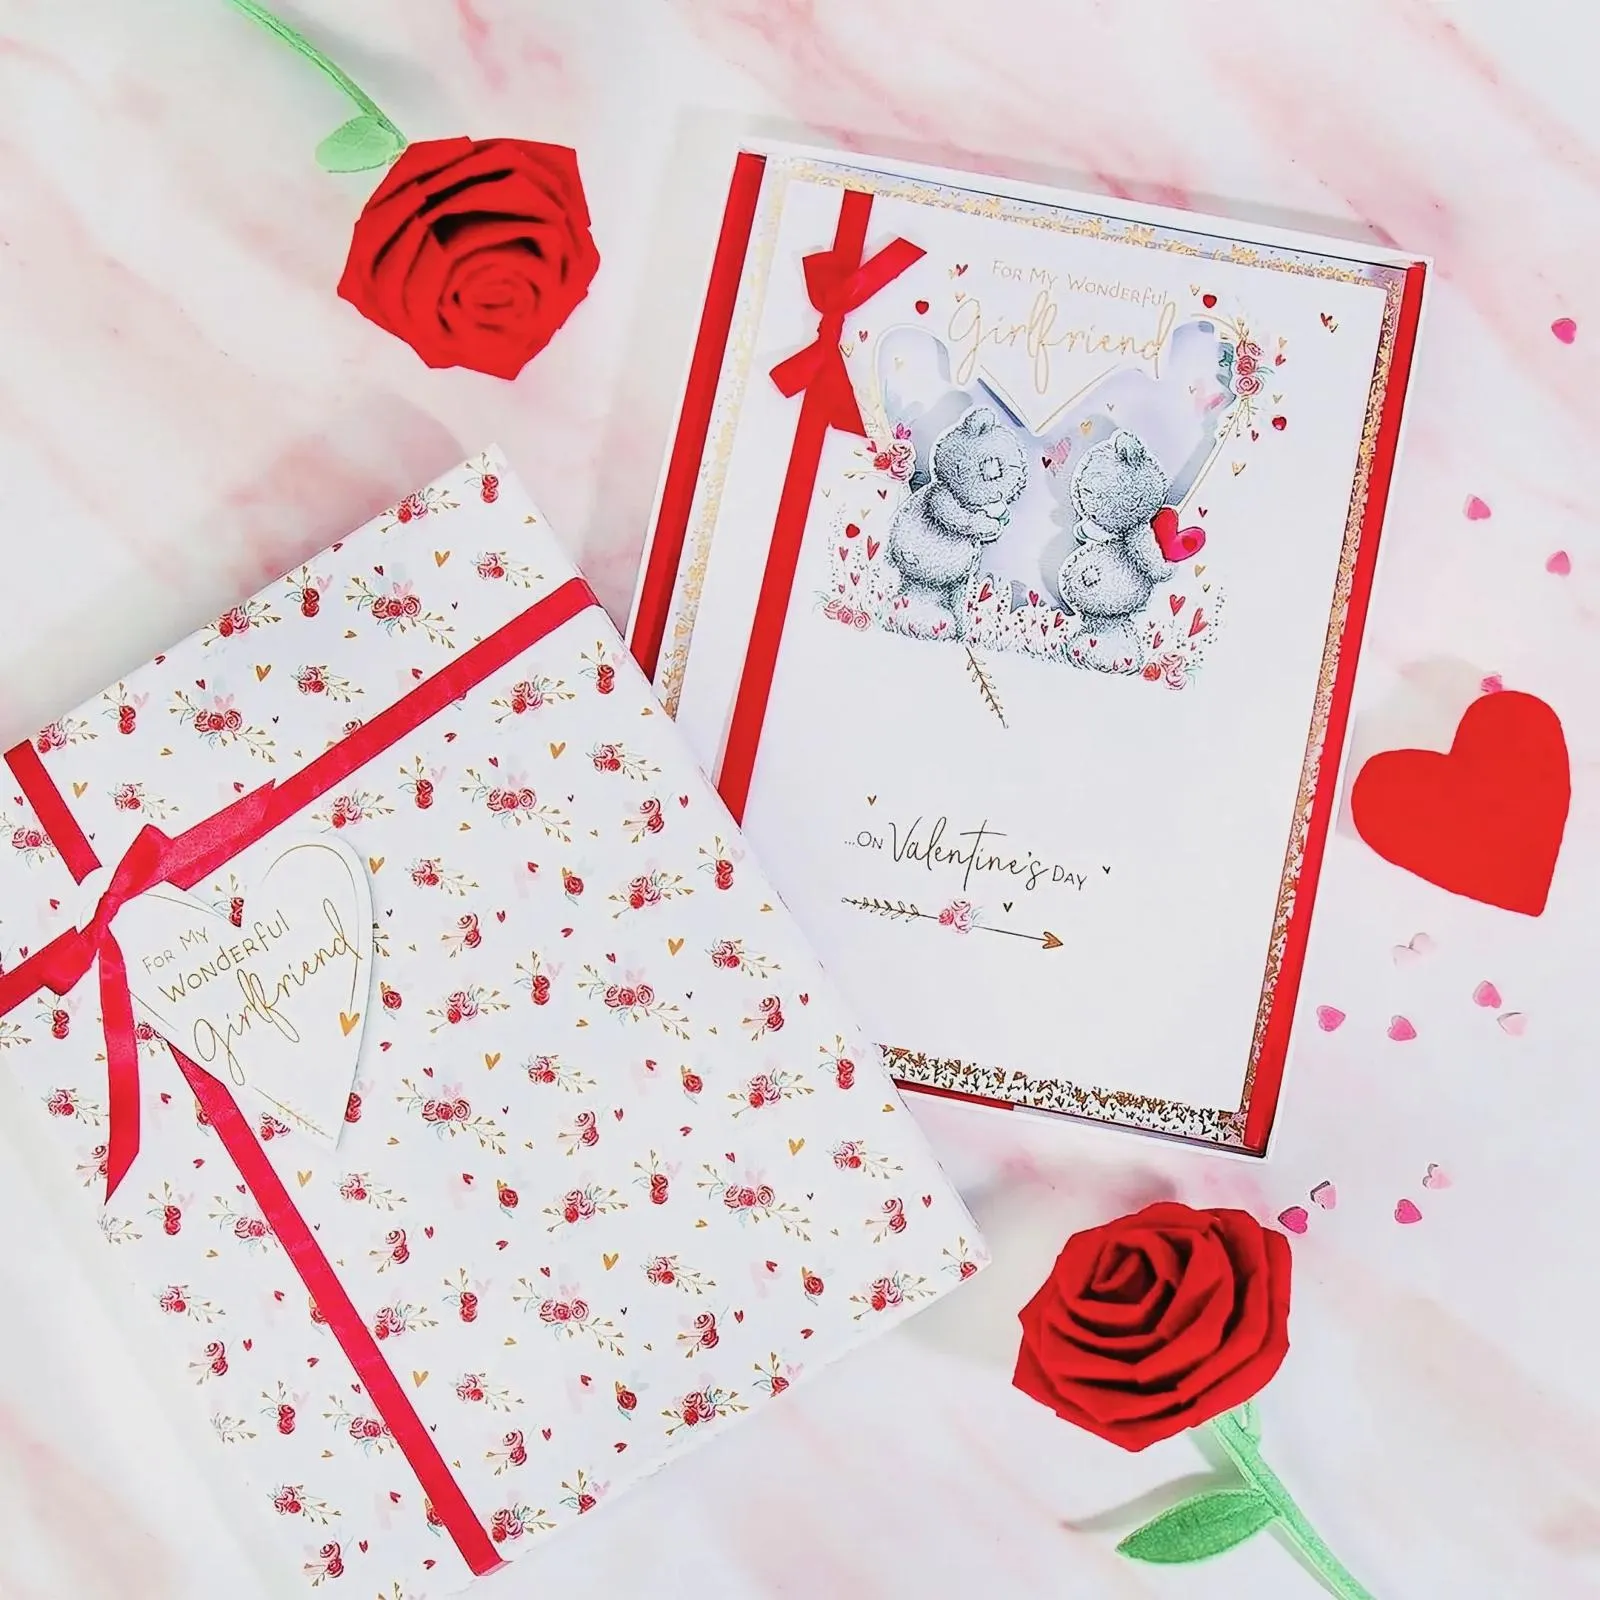 Valentine's Day gift boxes and roses on a marble surface